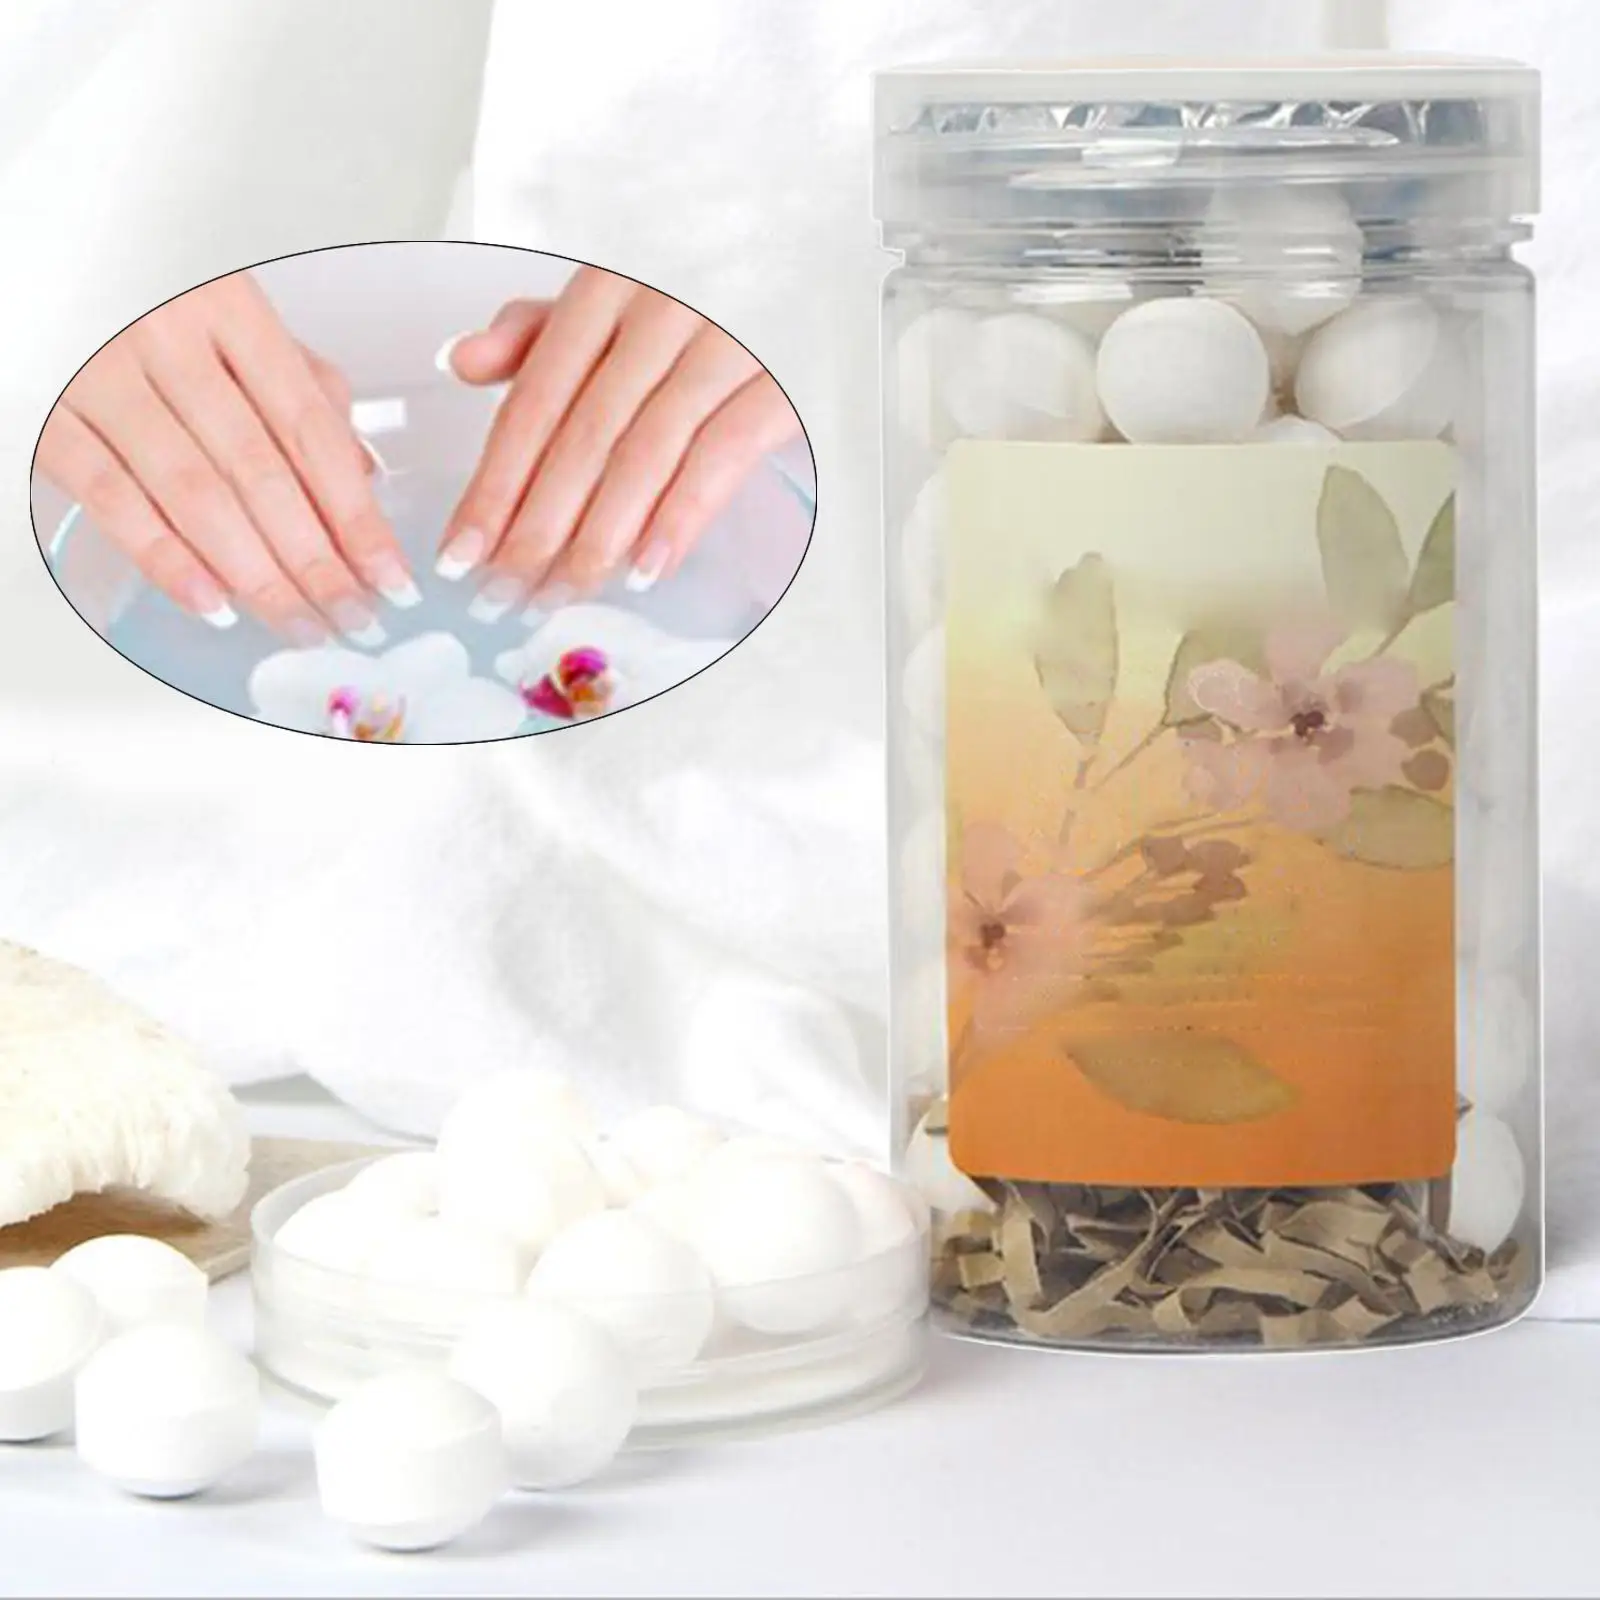 80 Pieces Effervescent Tablets Tool for Softening Skin Accessory